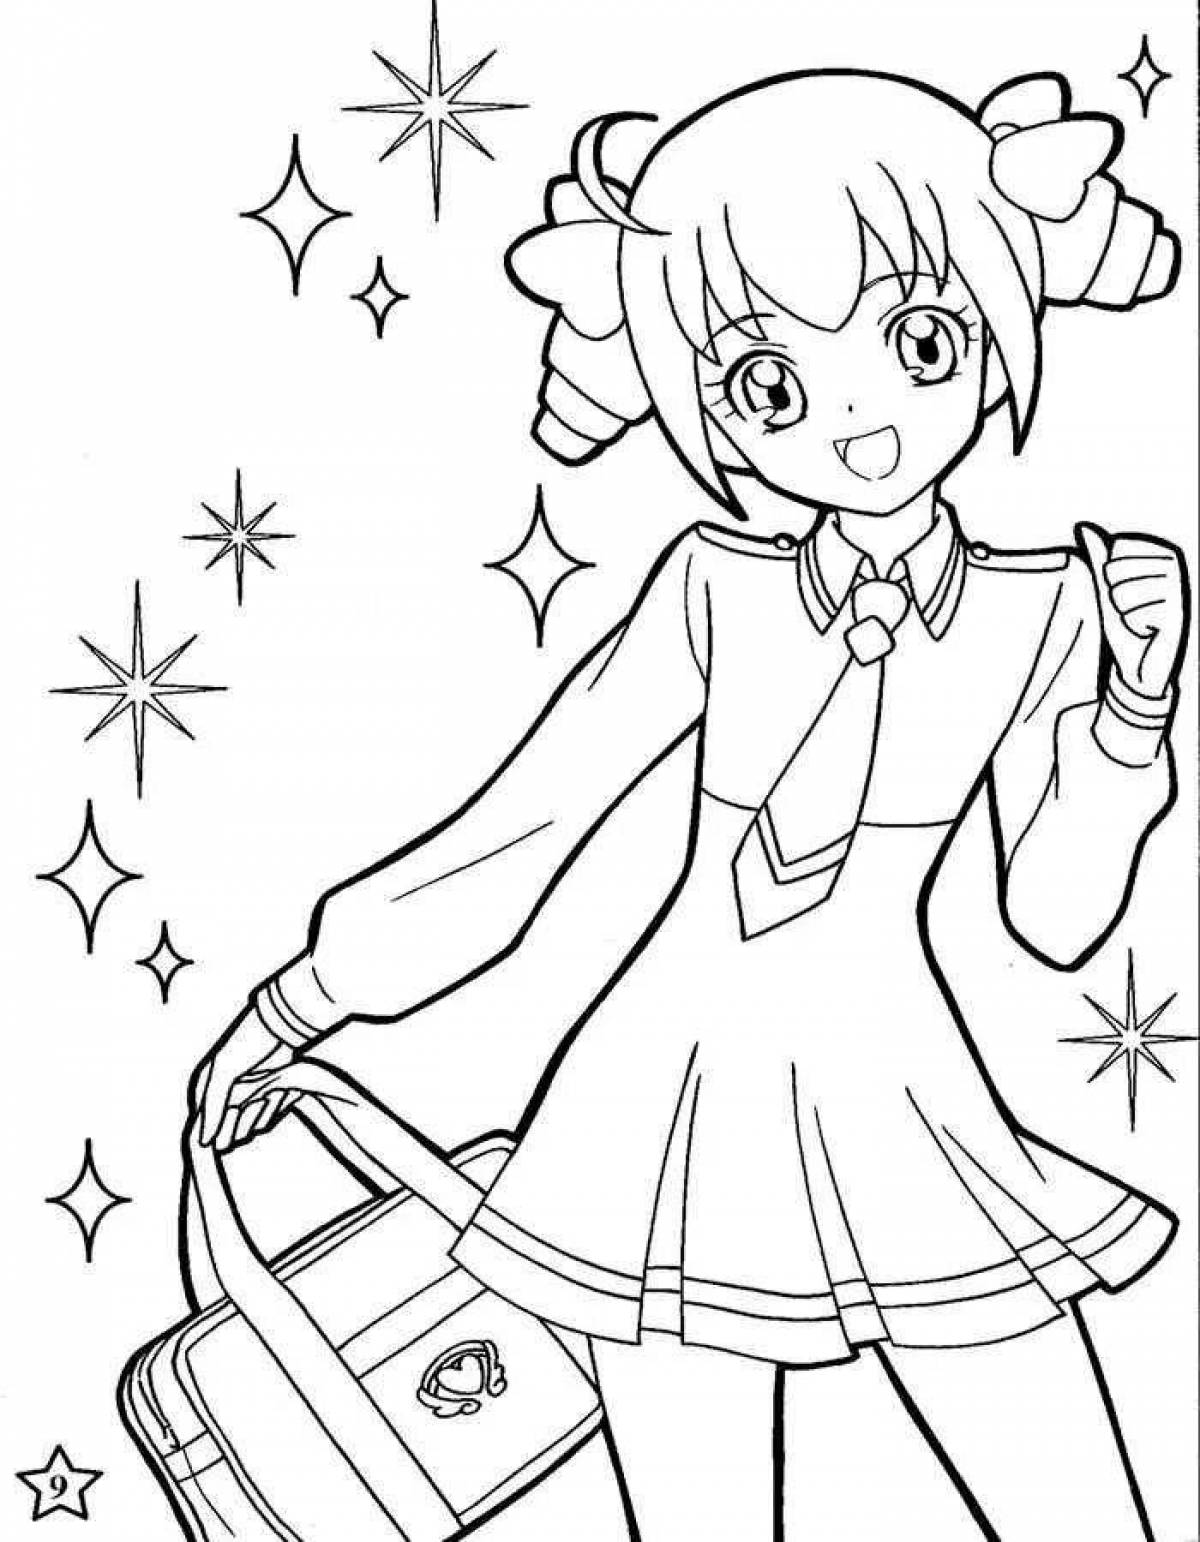 Bright anime new year coloring book